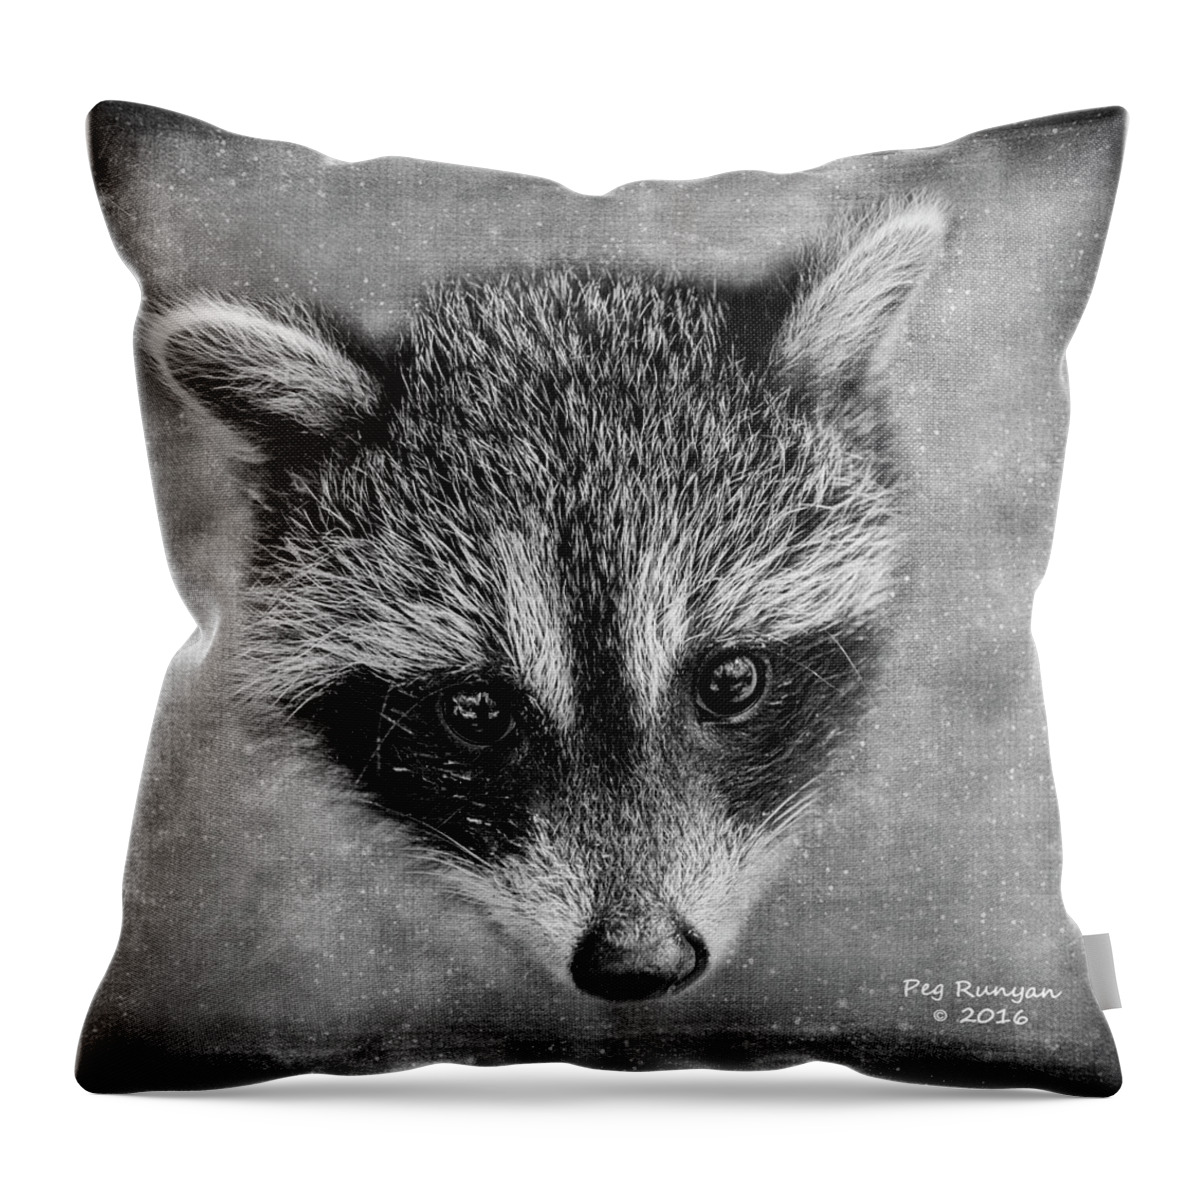 Raccoon Throw Pillow featuring the photograph Baby Face by Peg Runyan